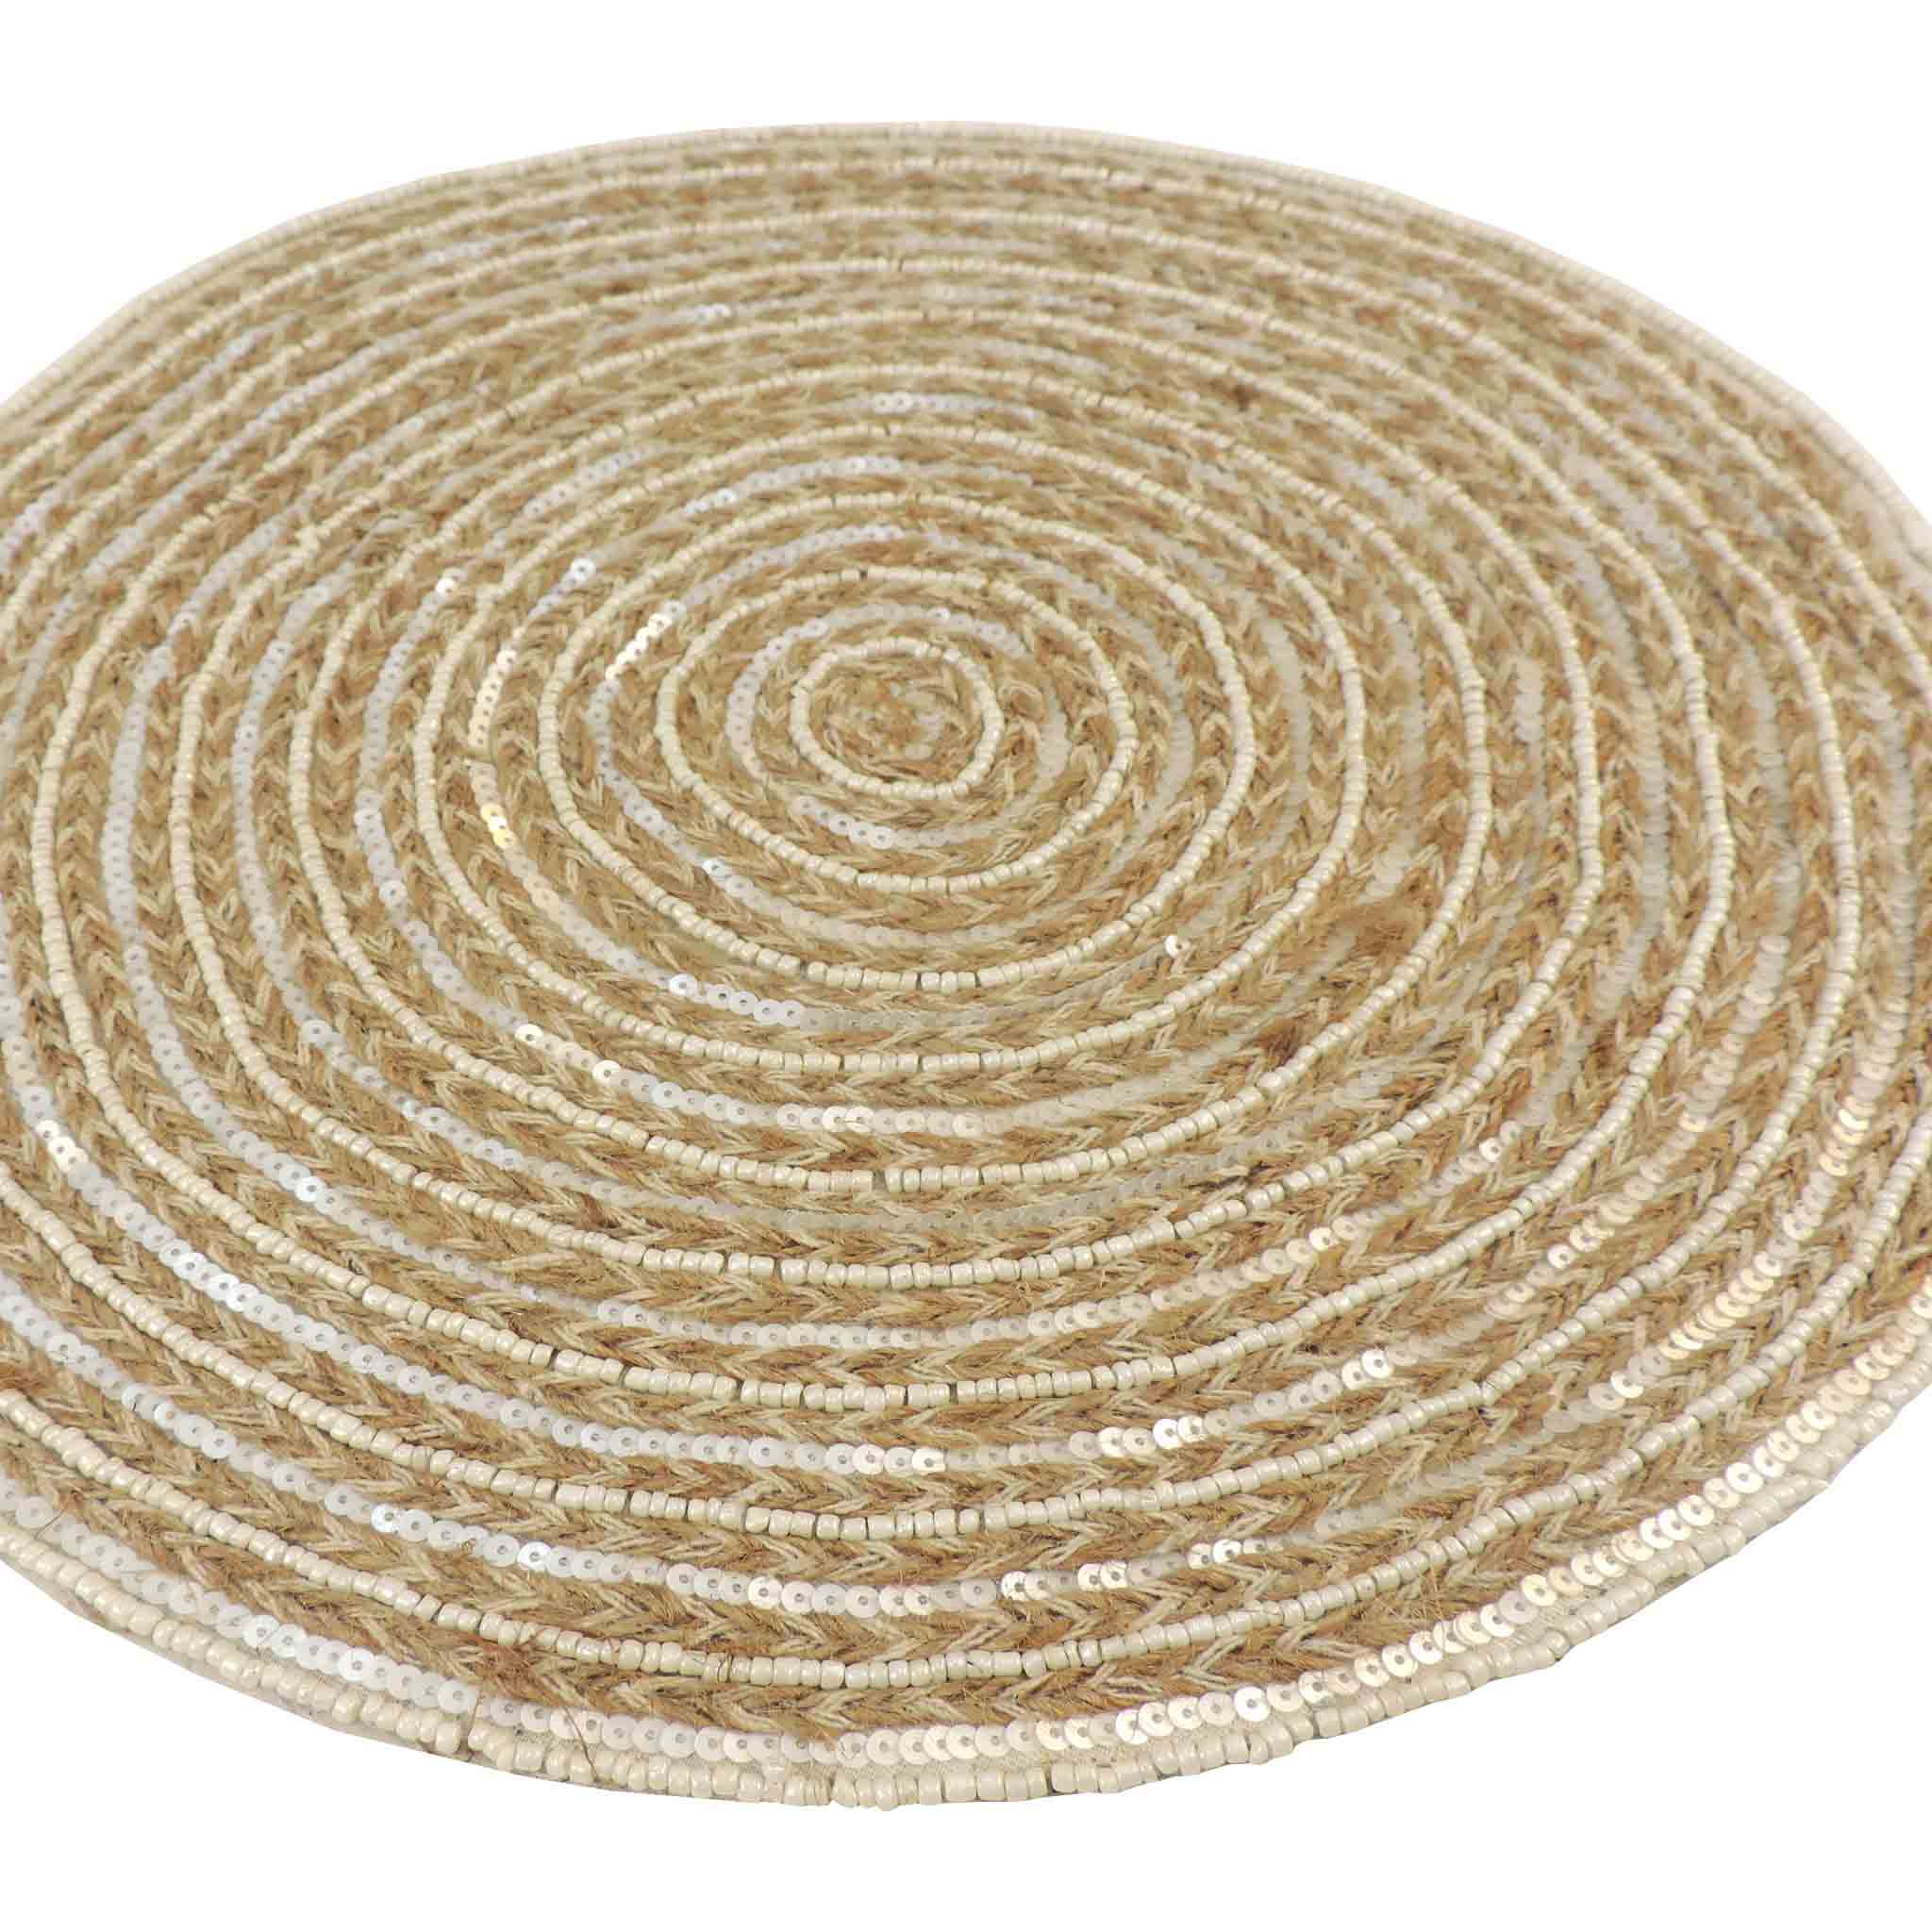 Jute Embroidered Placemat in Beige, Set of 2/4